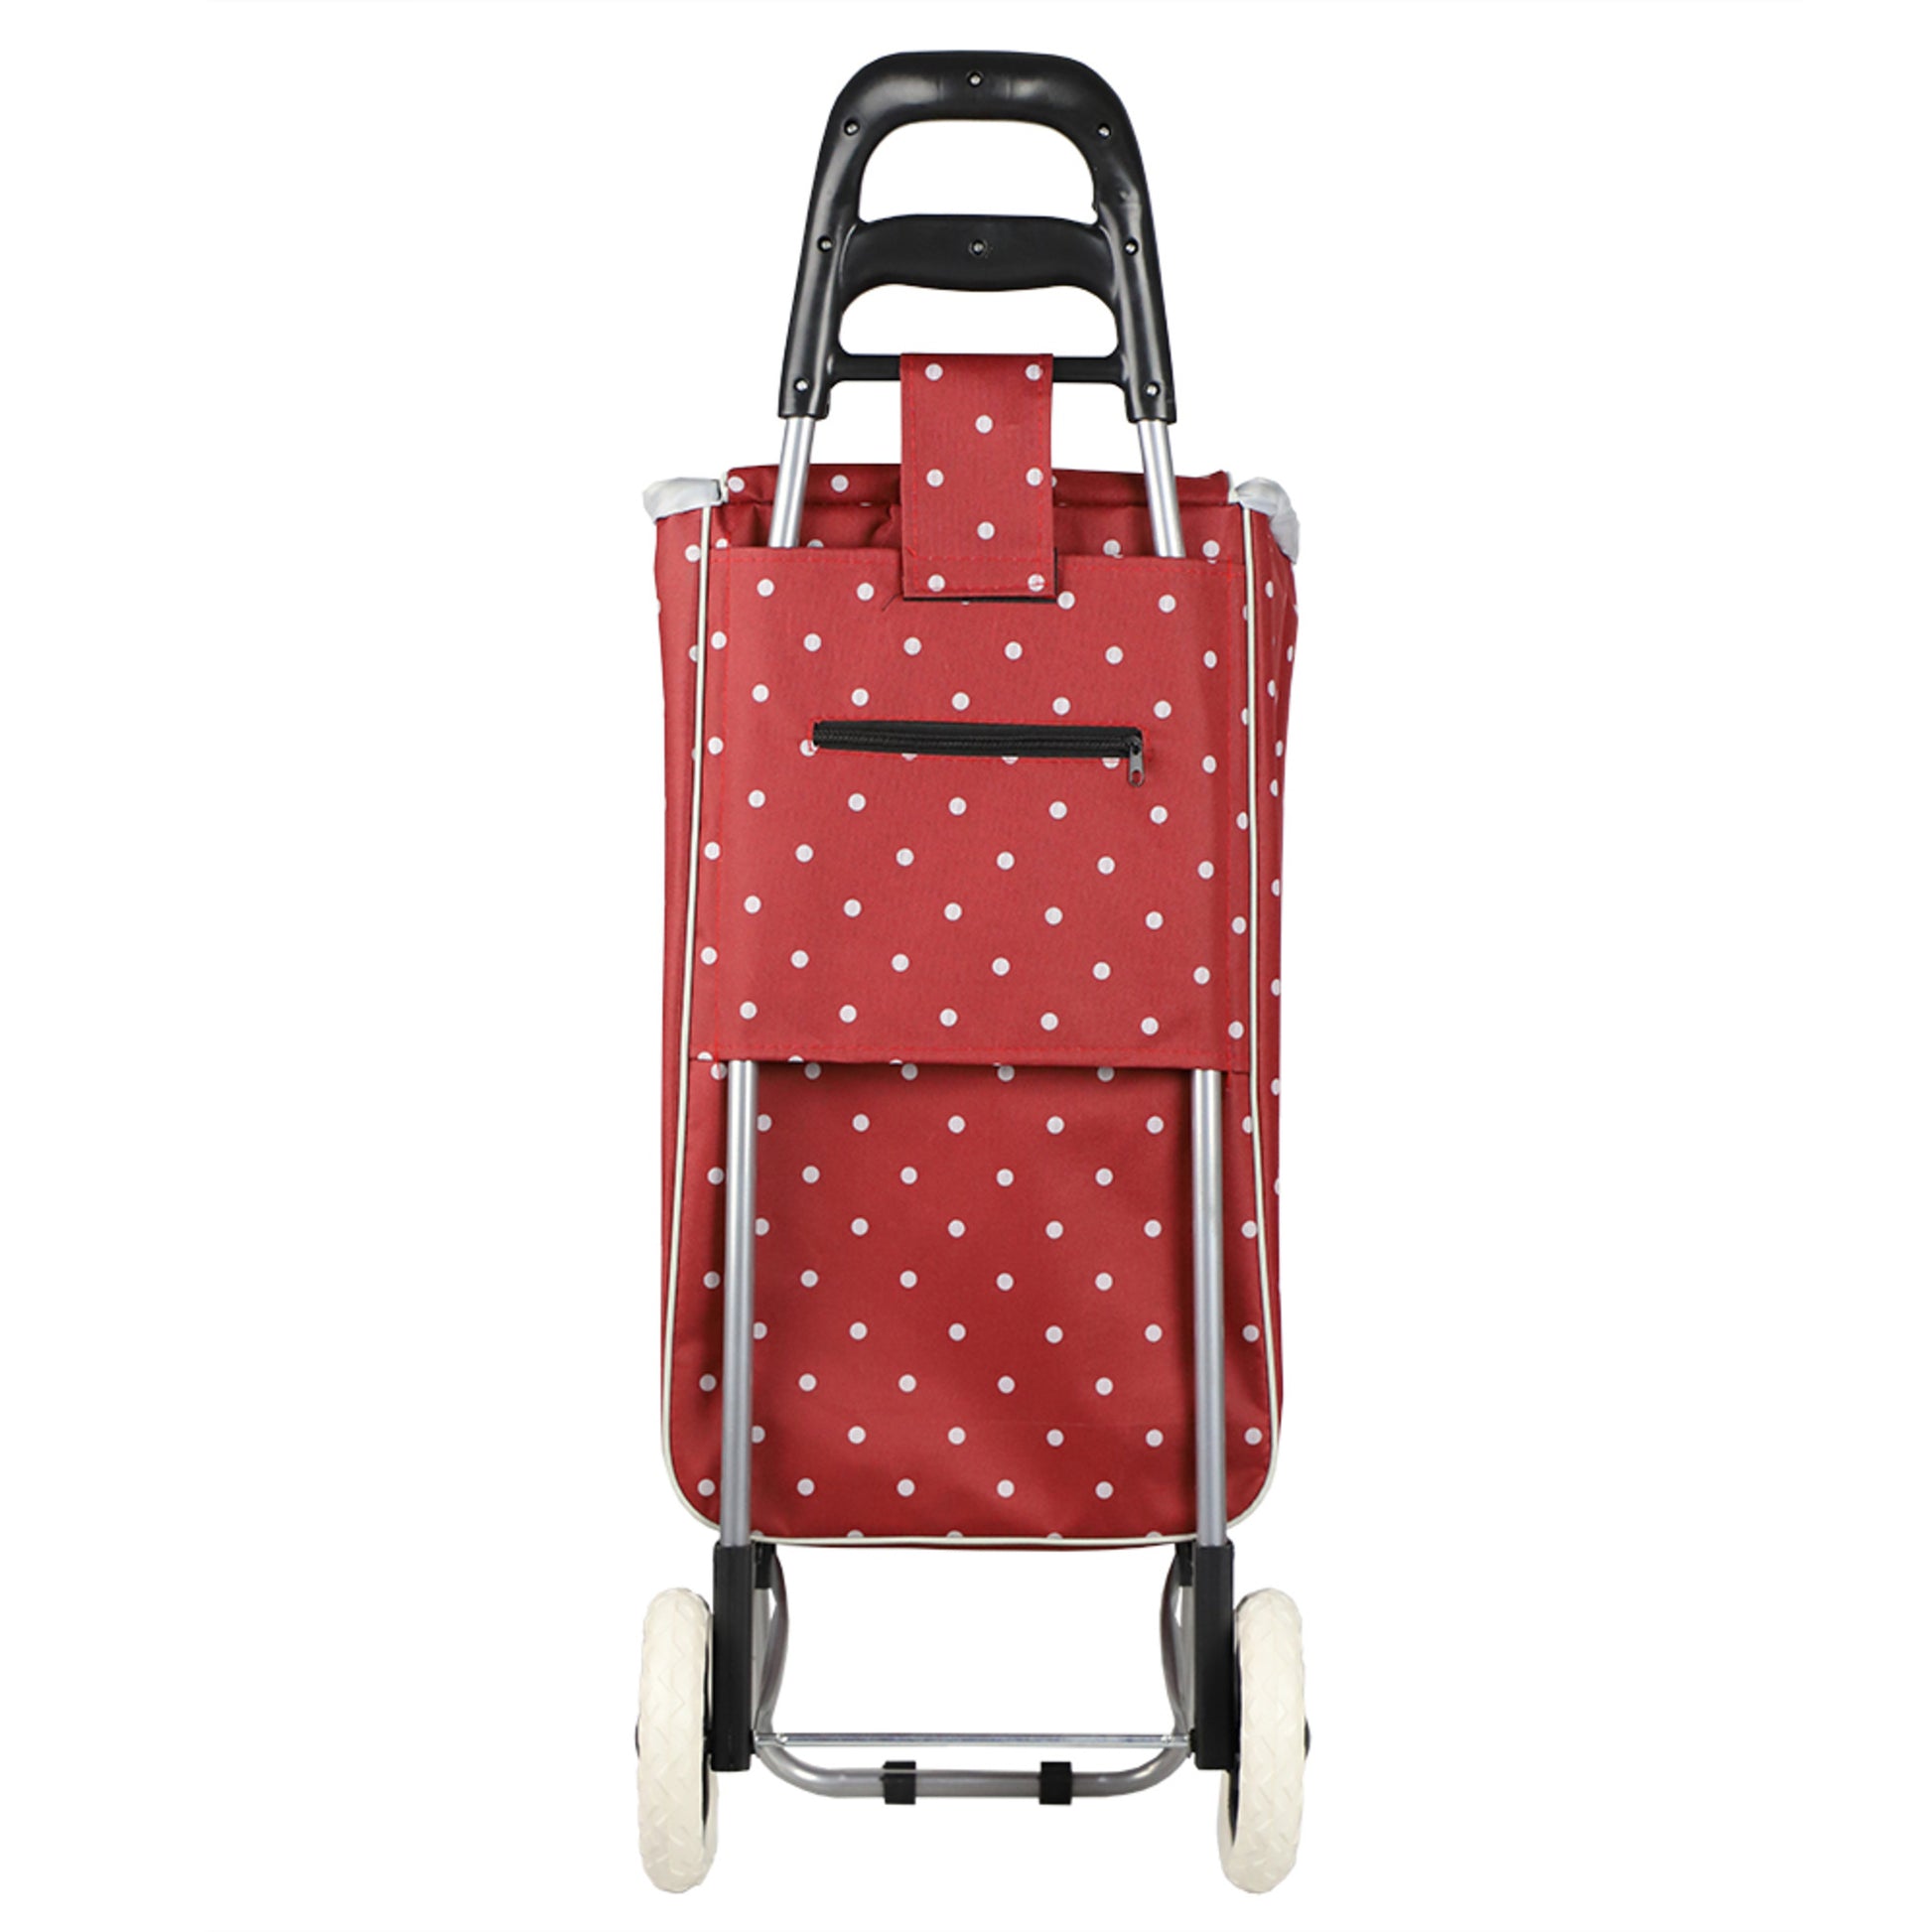 Home Basics Polka Dot Multi-Purpose Rolling Cart With Built-In Chair, Red - Red